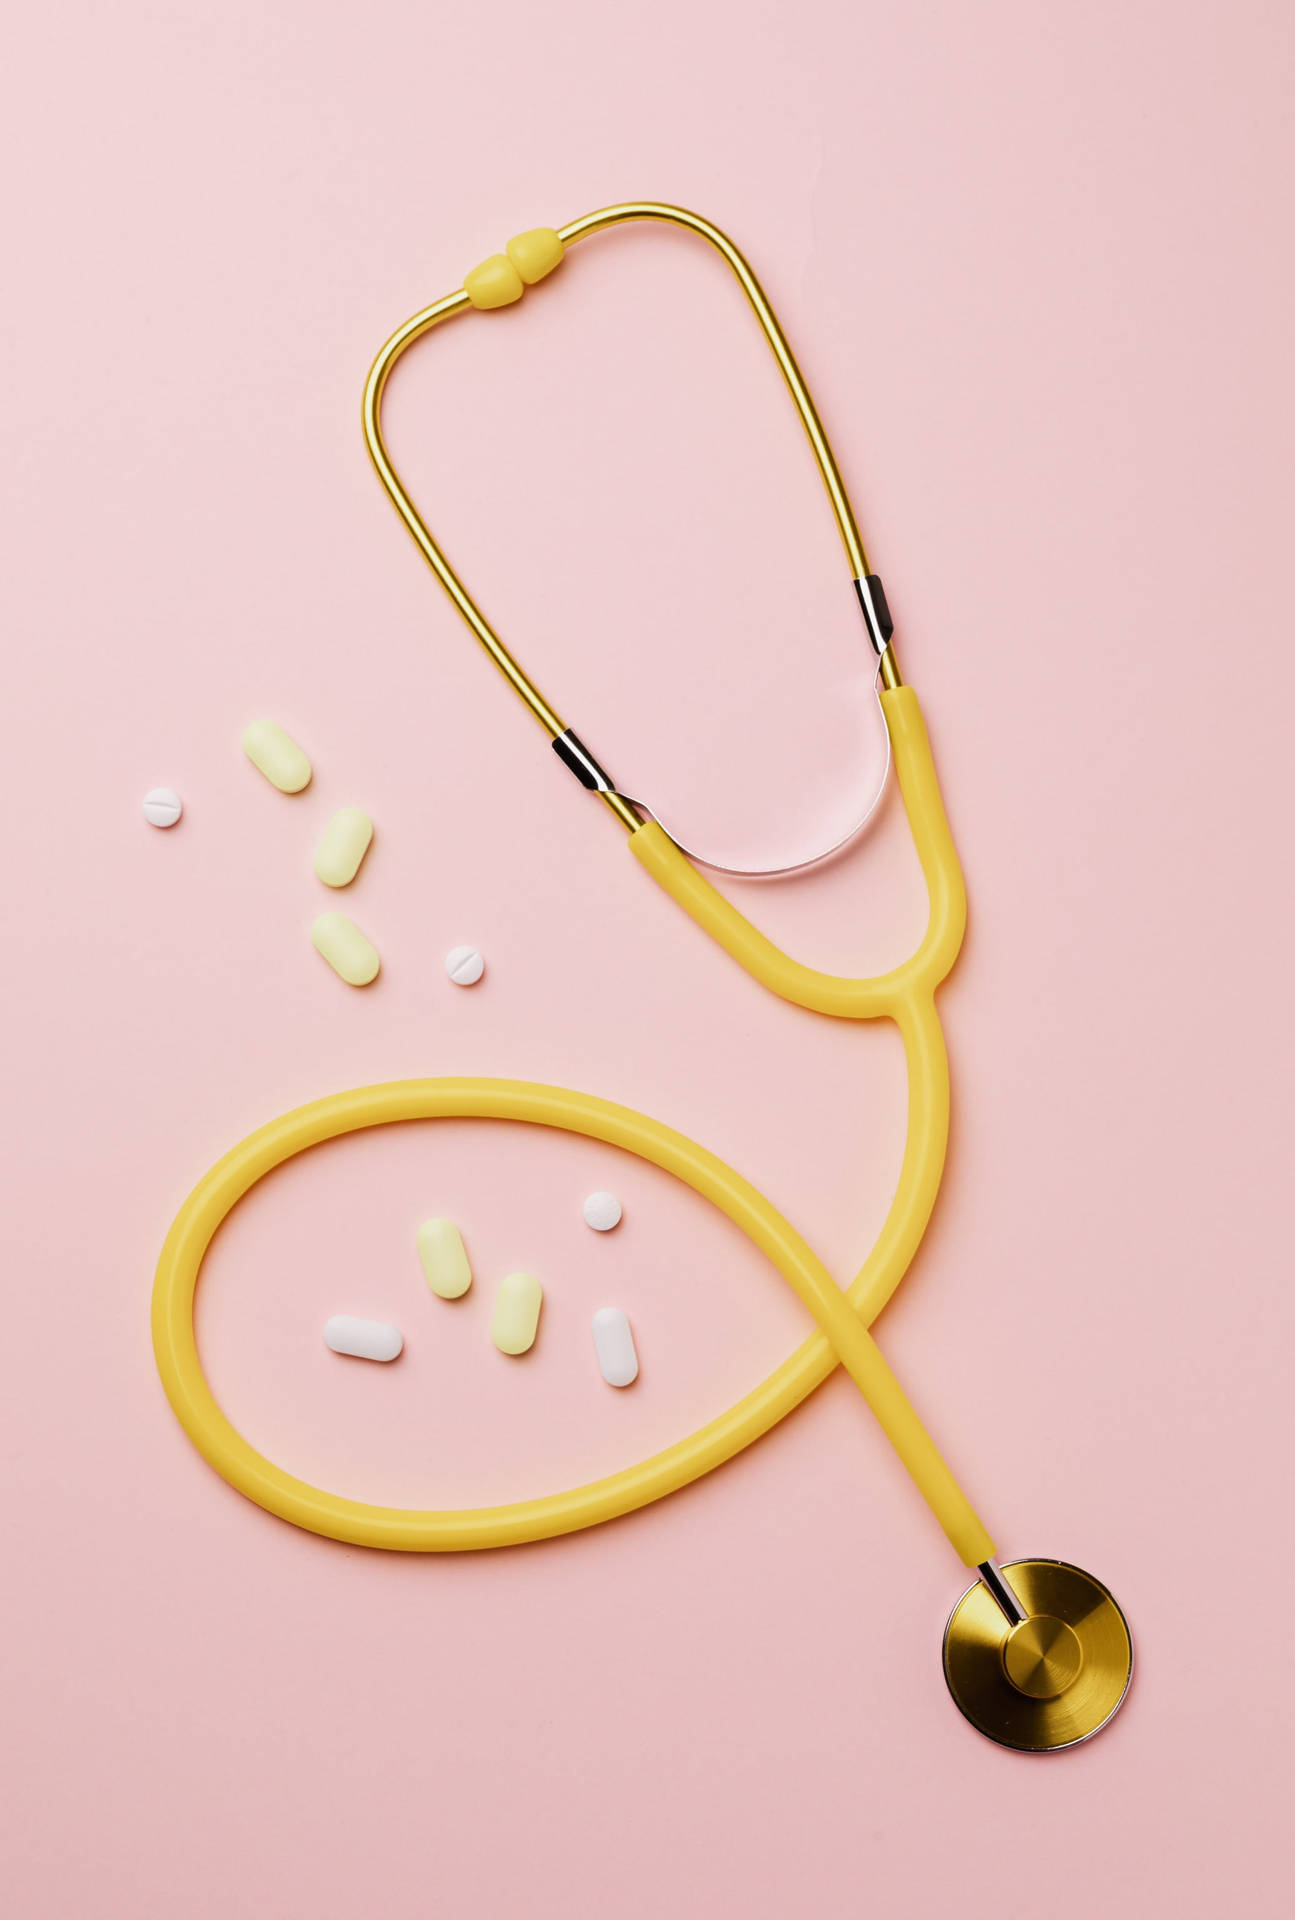 Caption: A Bright Yellow Stethoscope with Medicine Books - Symbolizing MBBS Studies Wallpaper